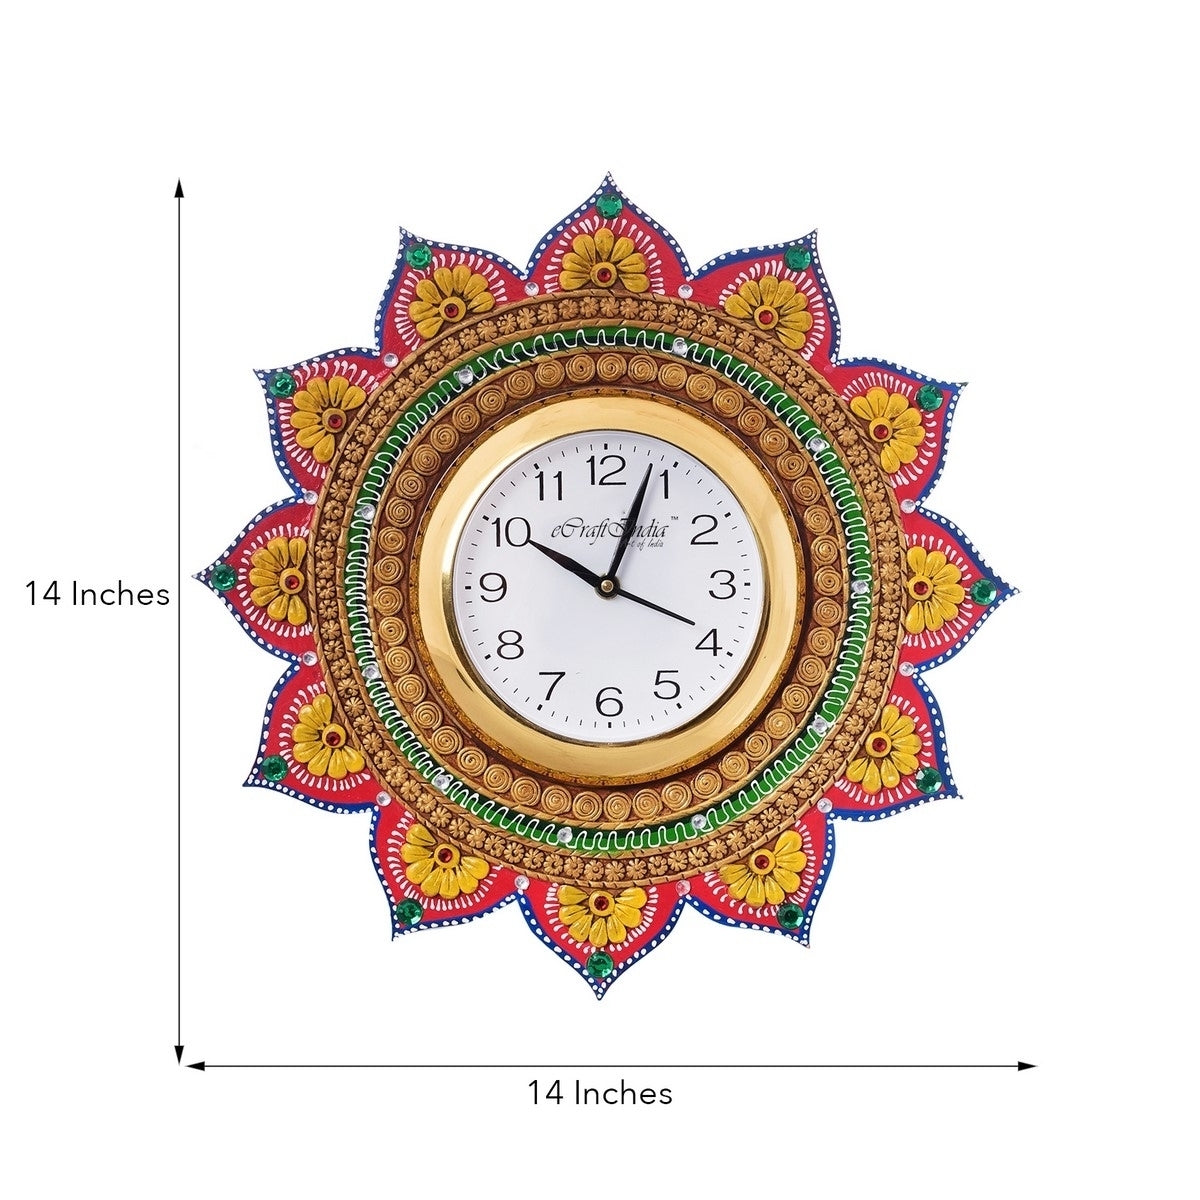 Sublime and Decorative Papier-Mache Wooden Handcrafted Wall Clock 2